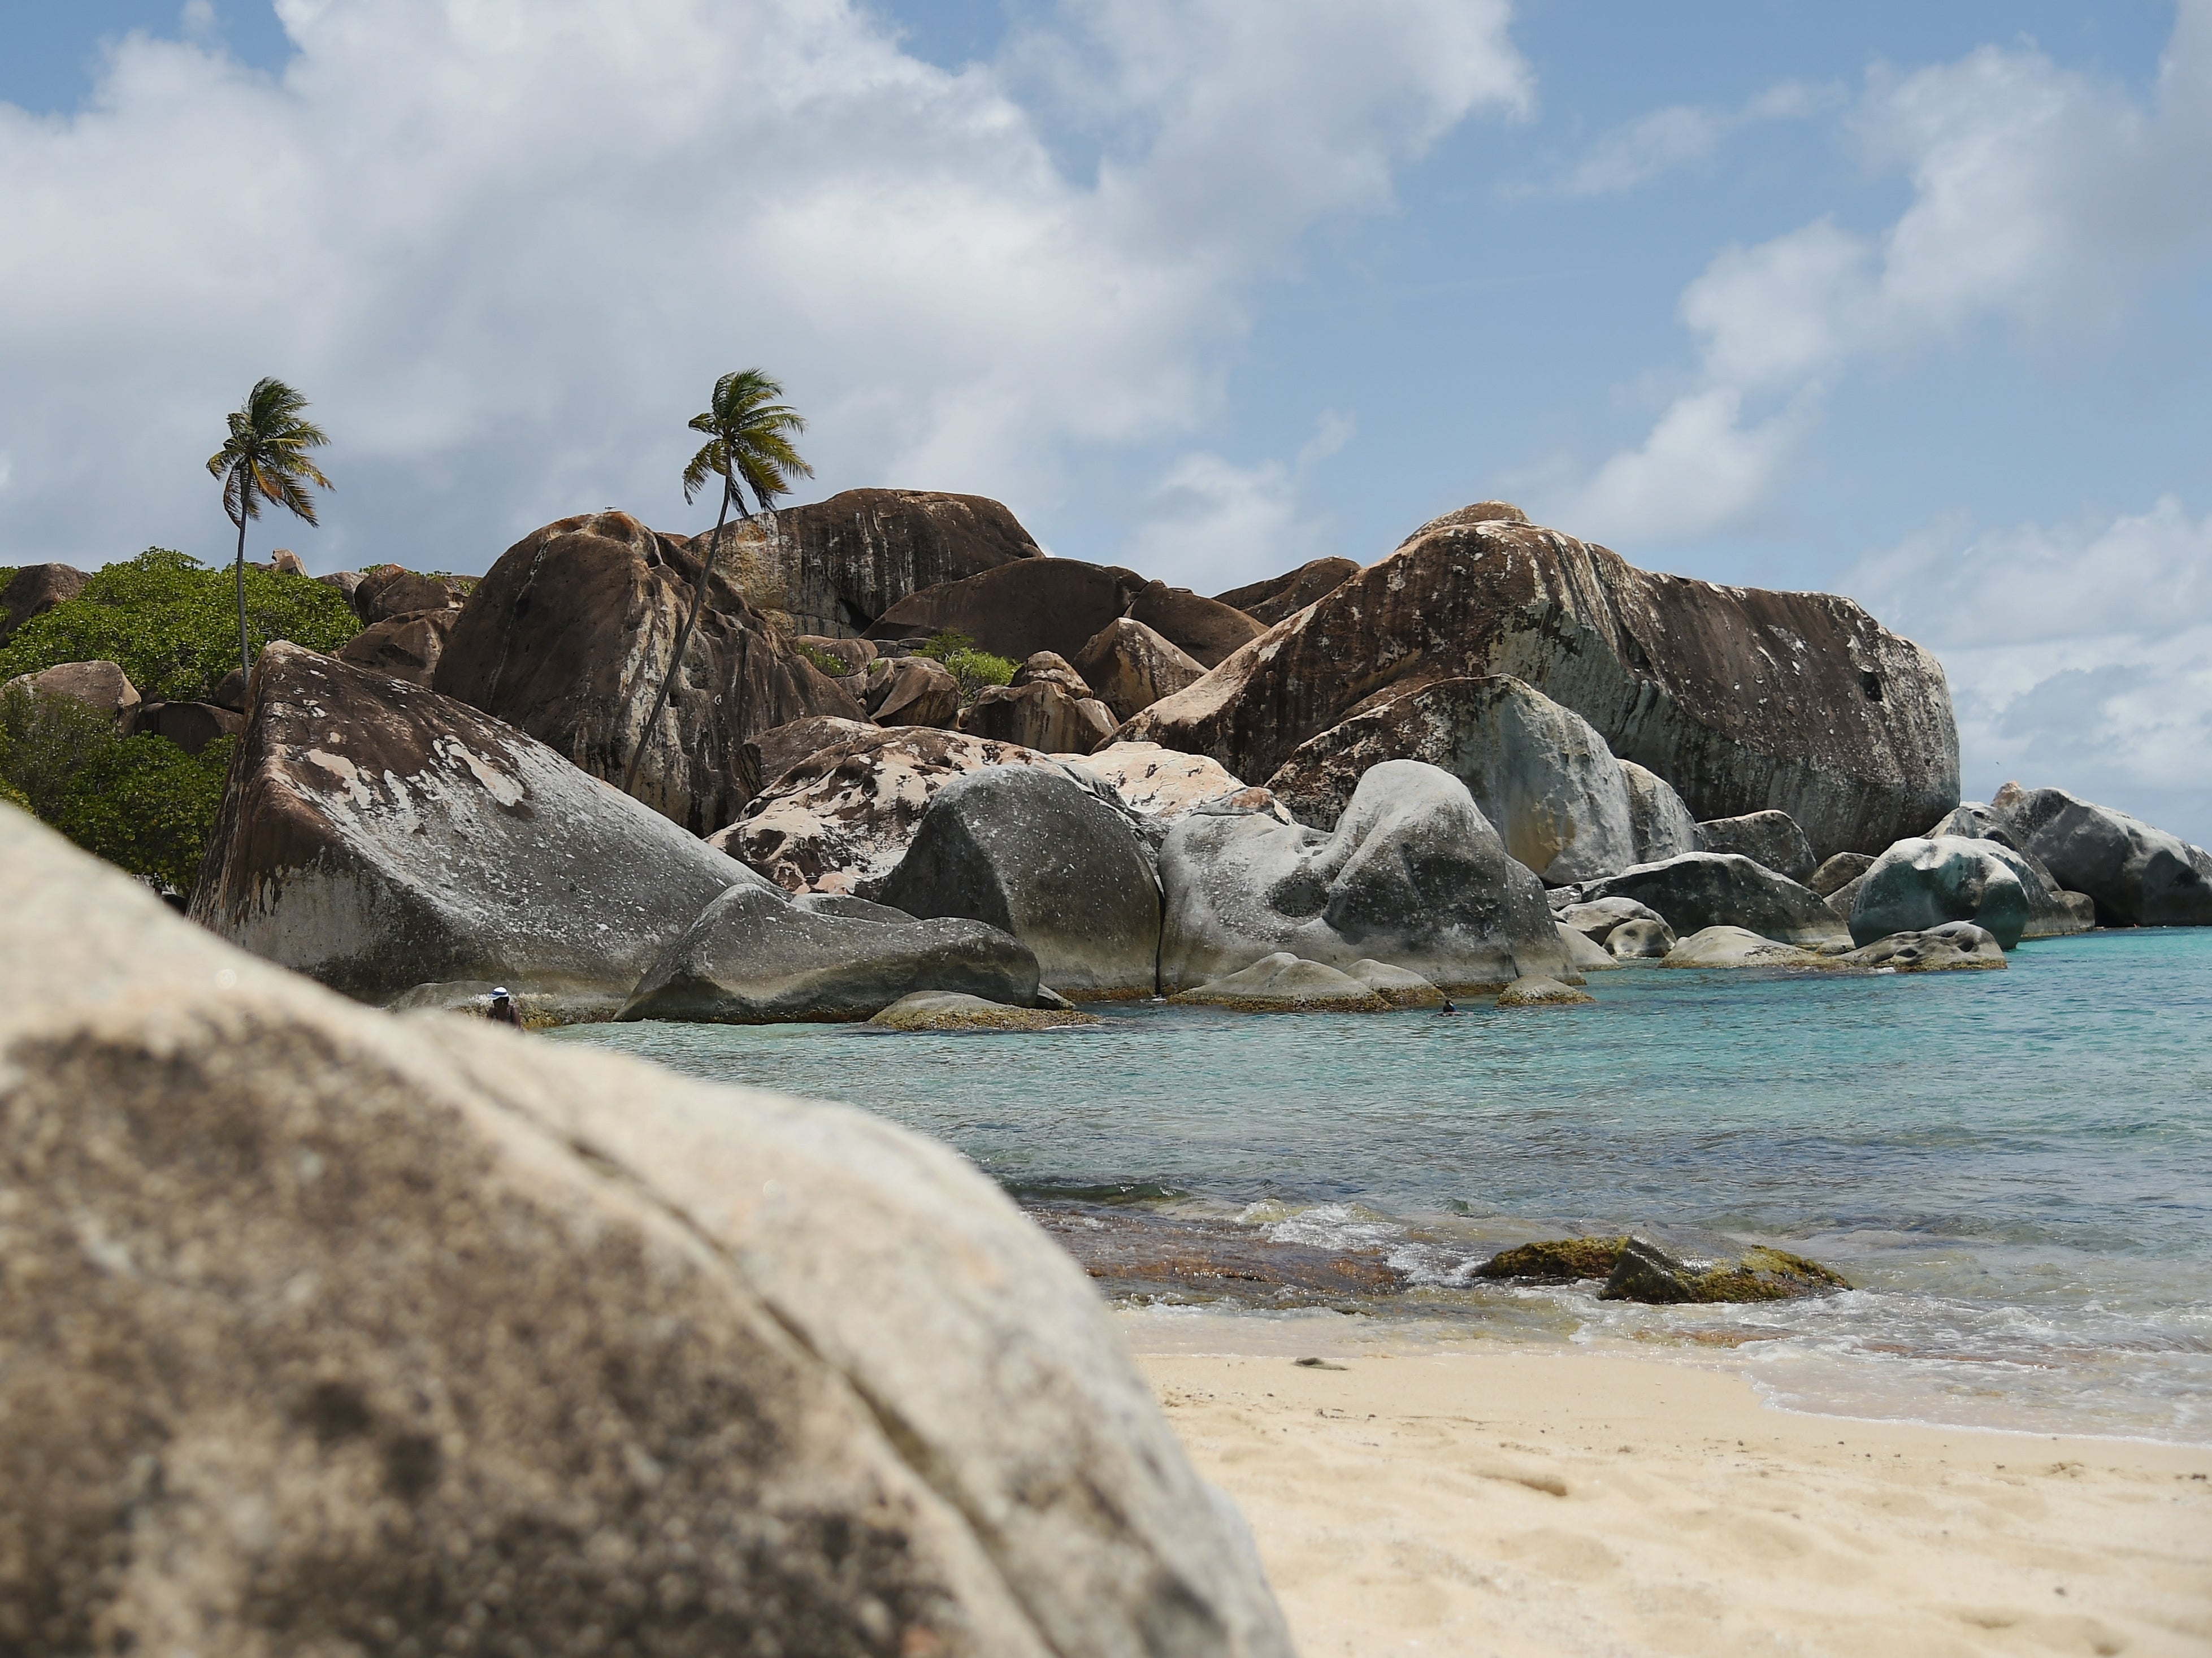 British Virgin Islands is one of a number of tax havens in the world